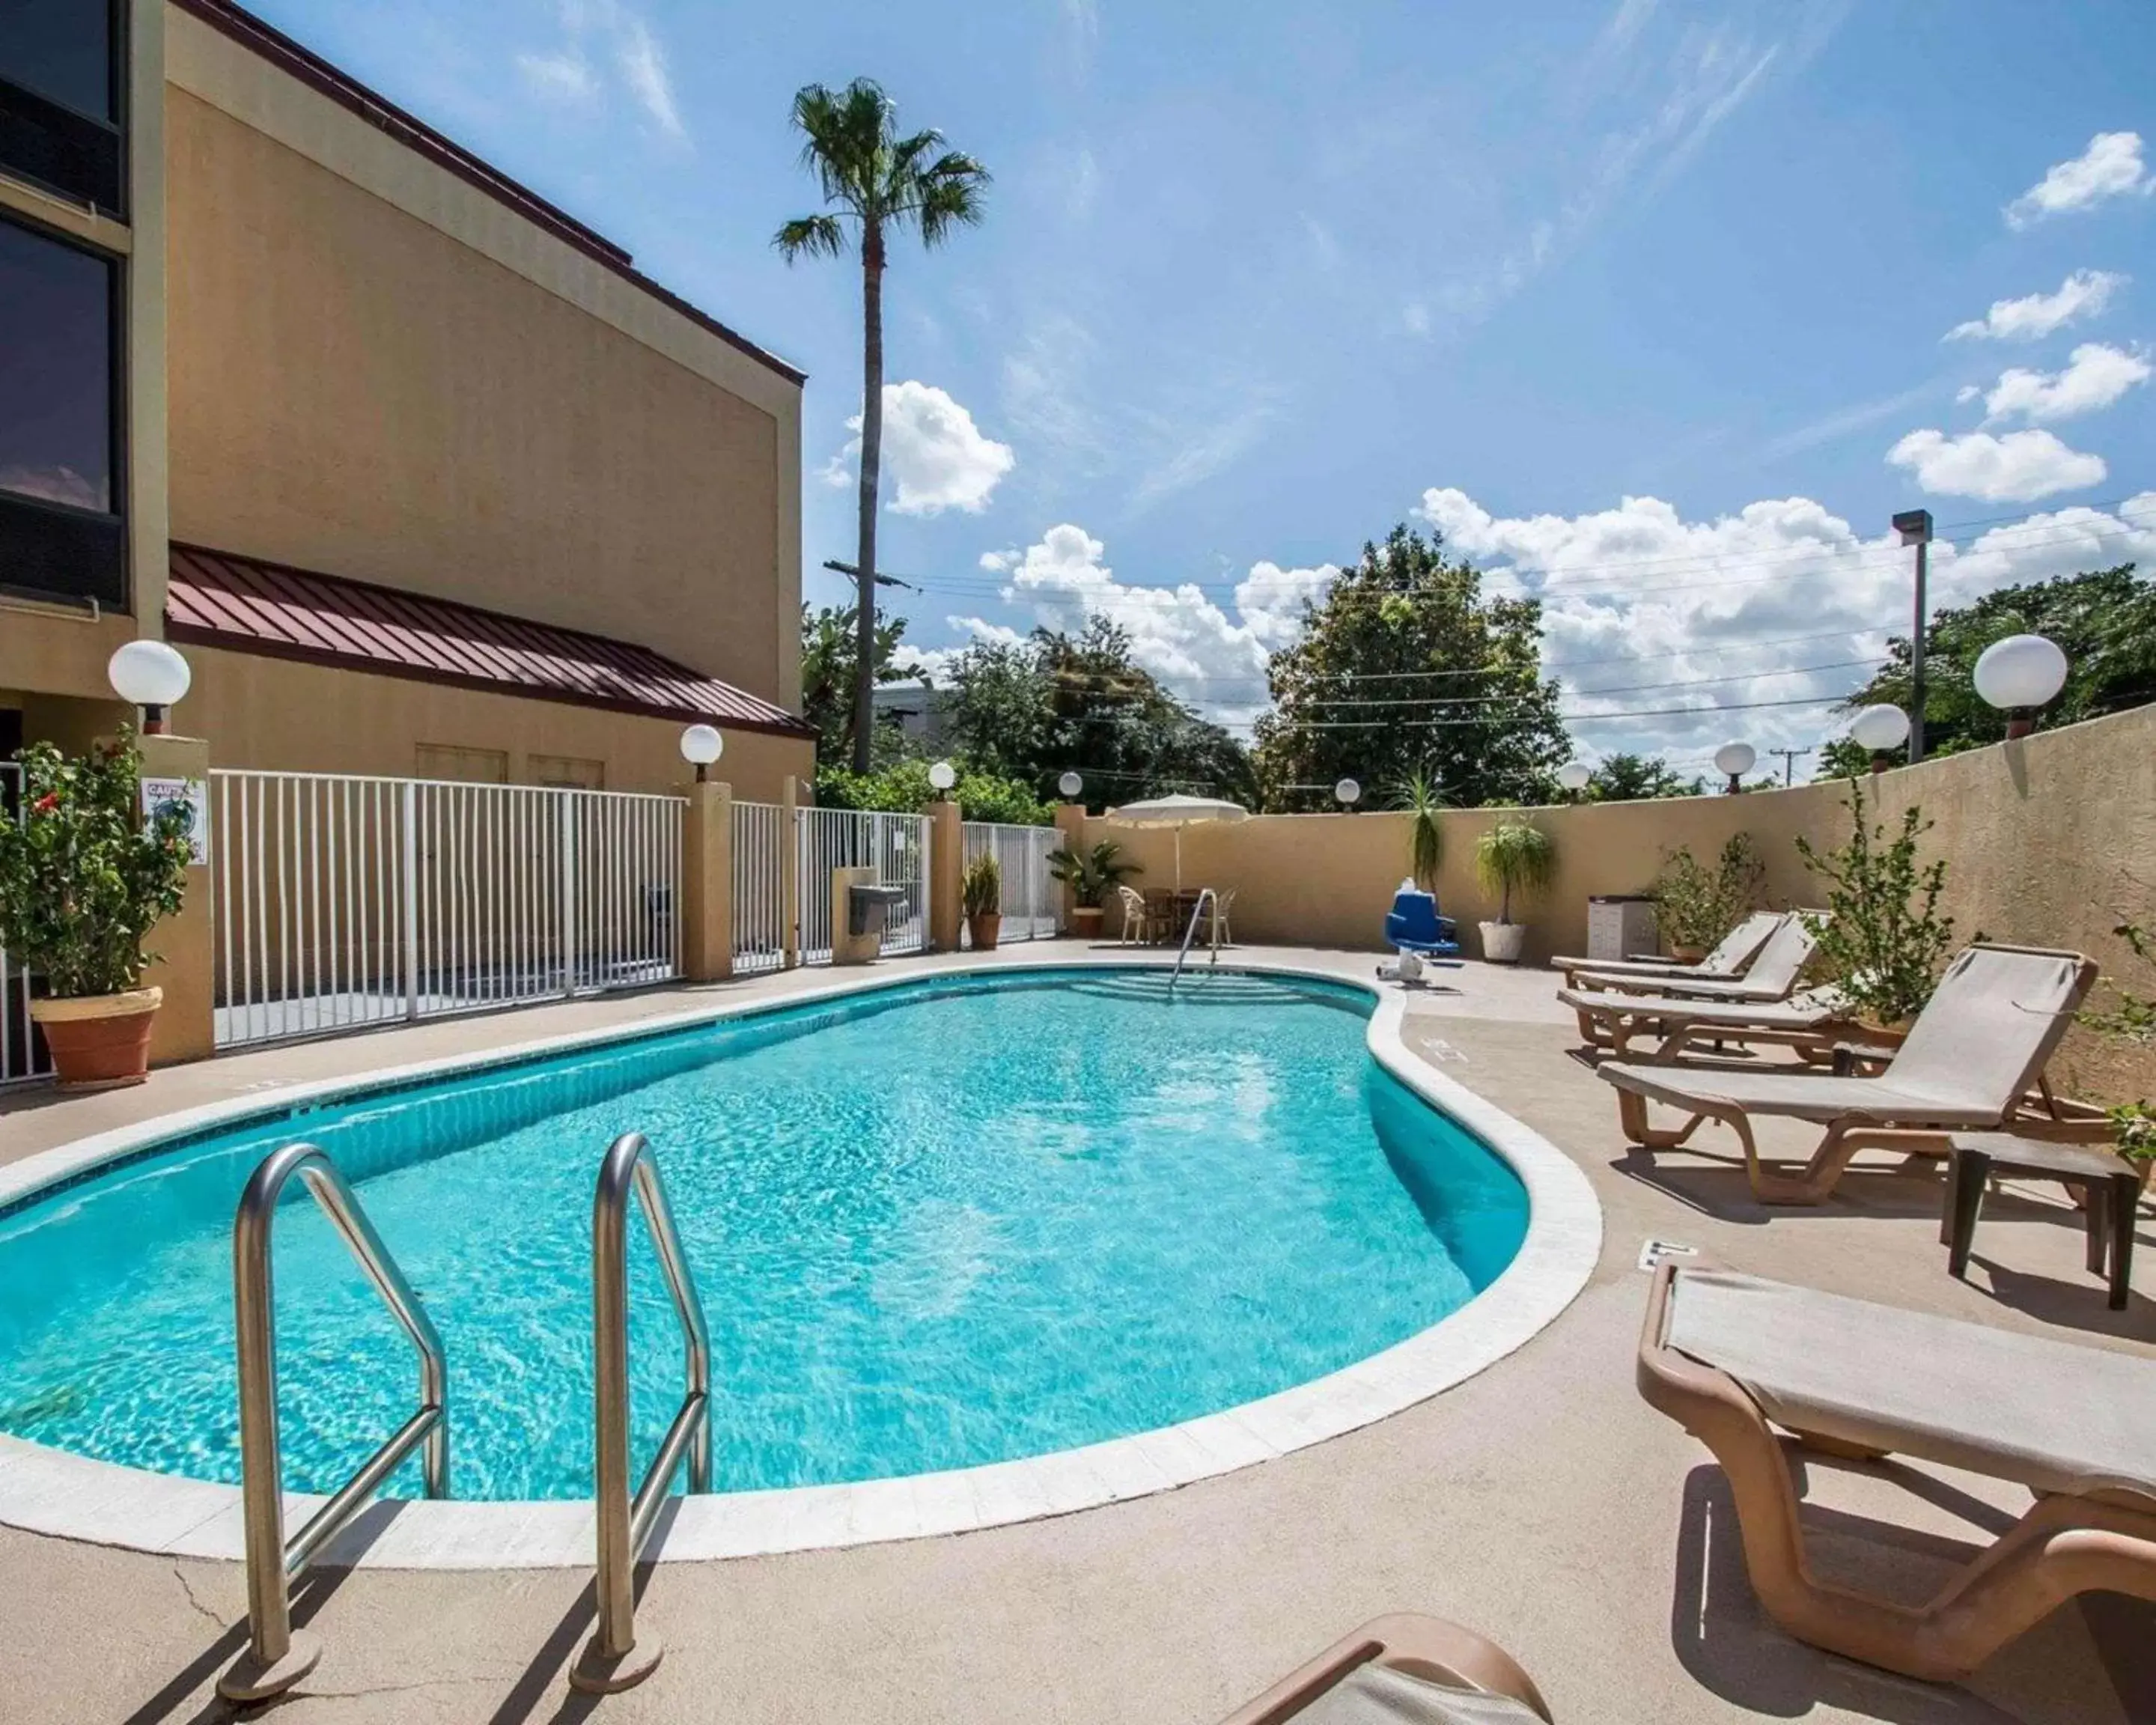 On site, Swimming Pool in Comfort Inn & Suites - Lantana - West Palm Beach South